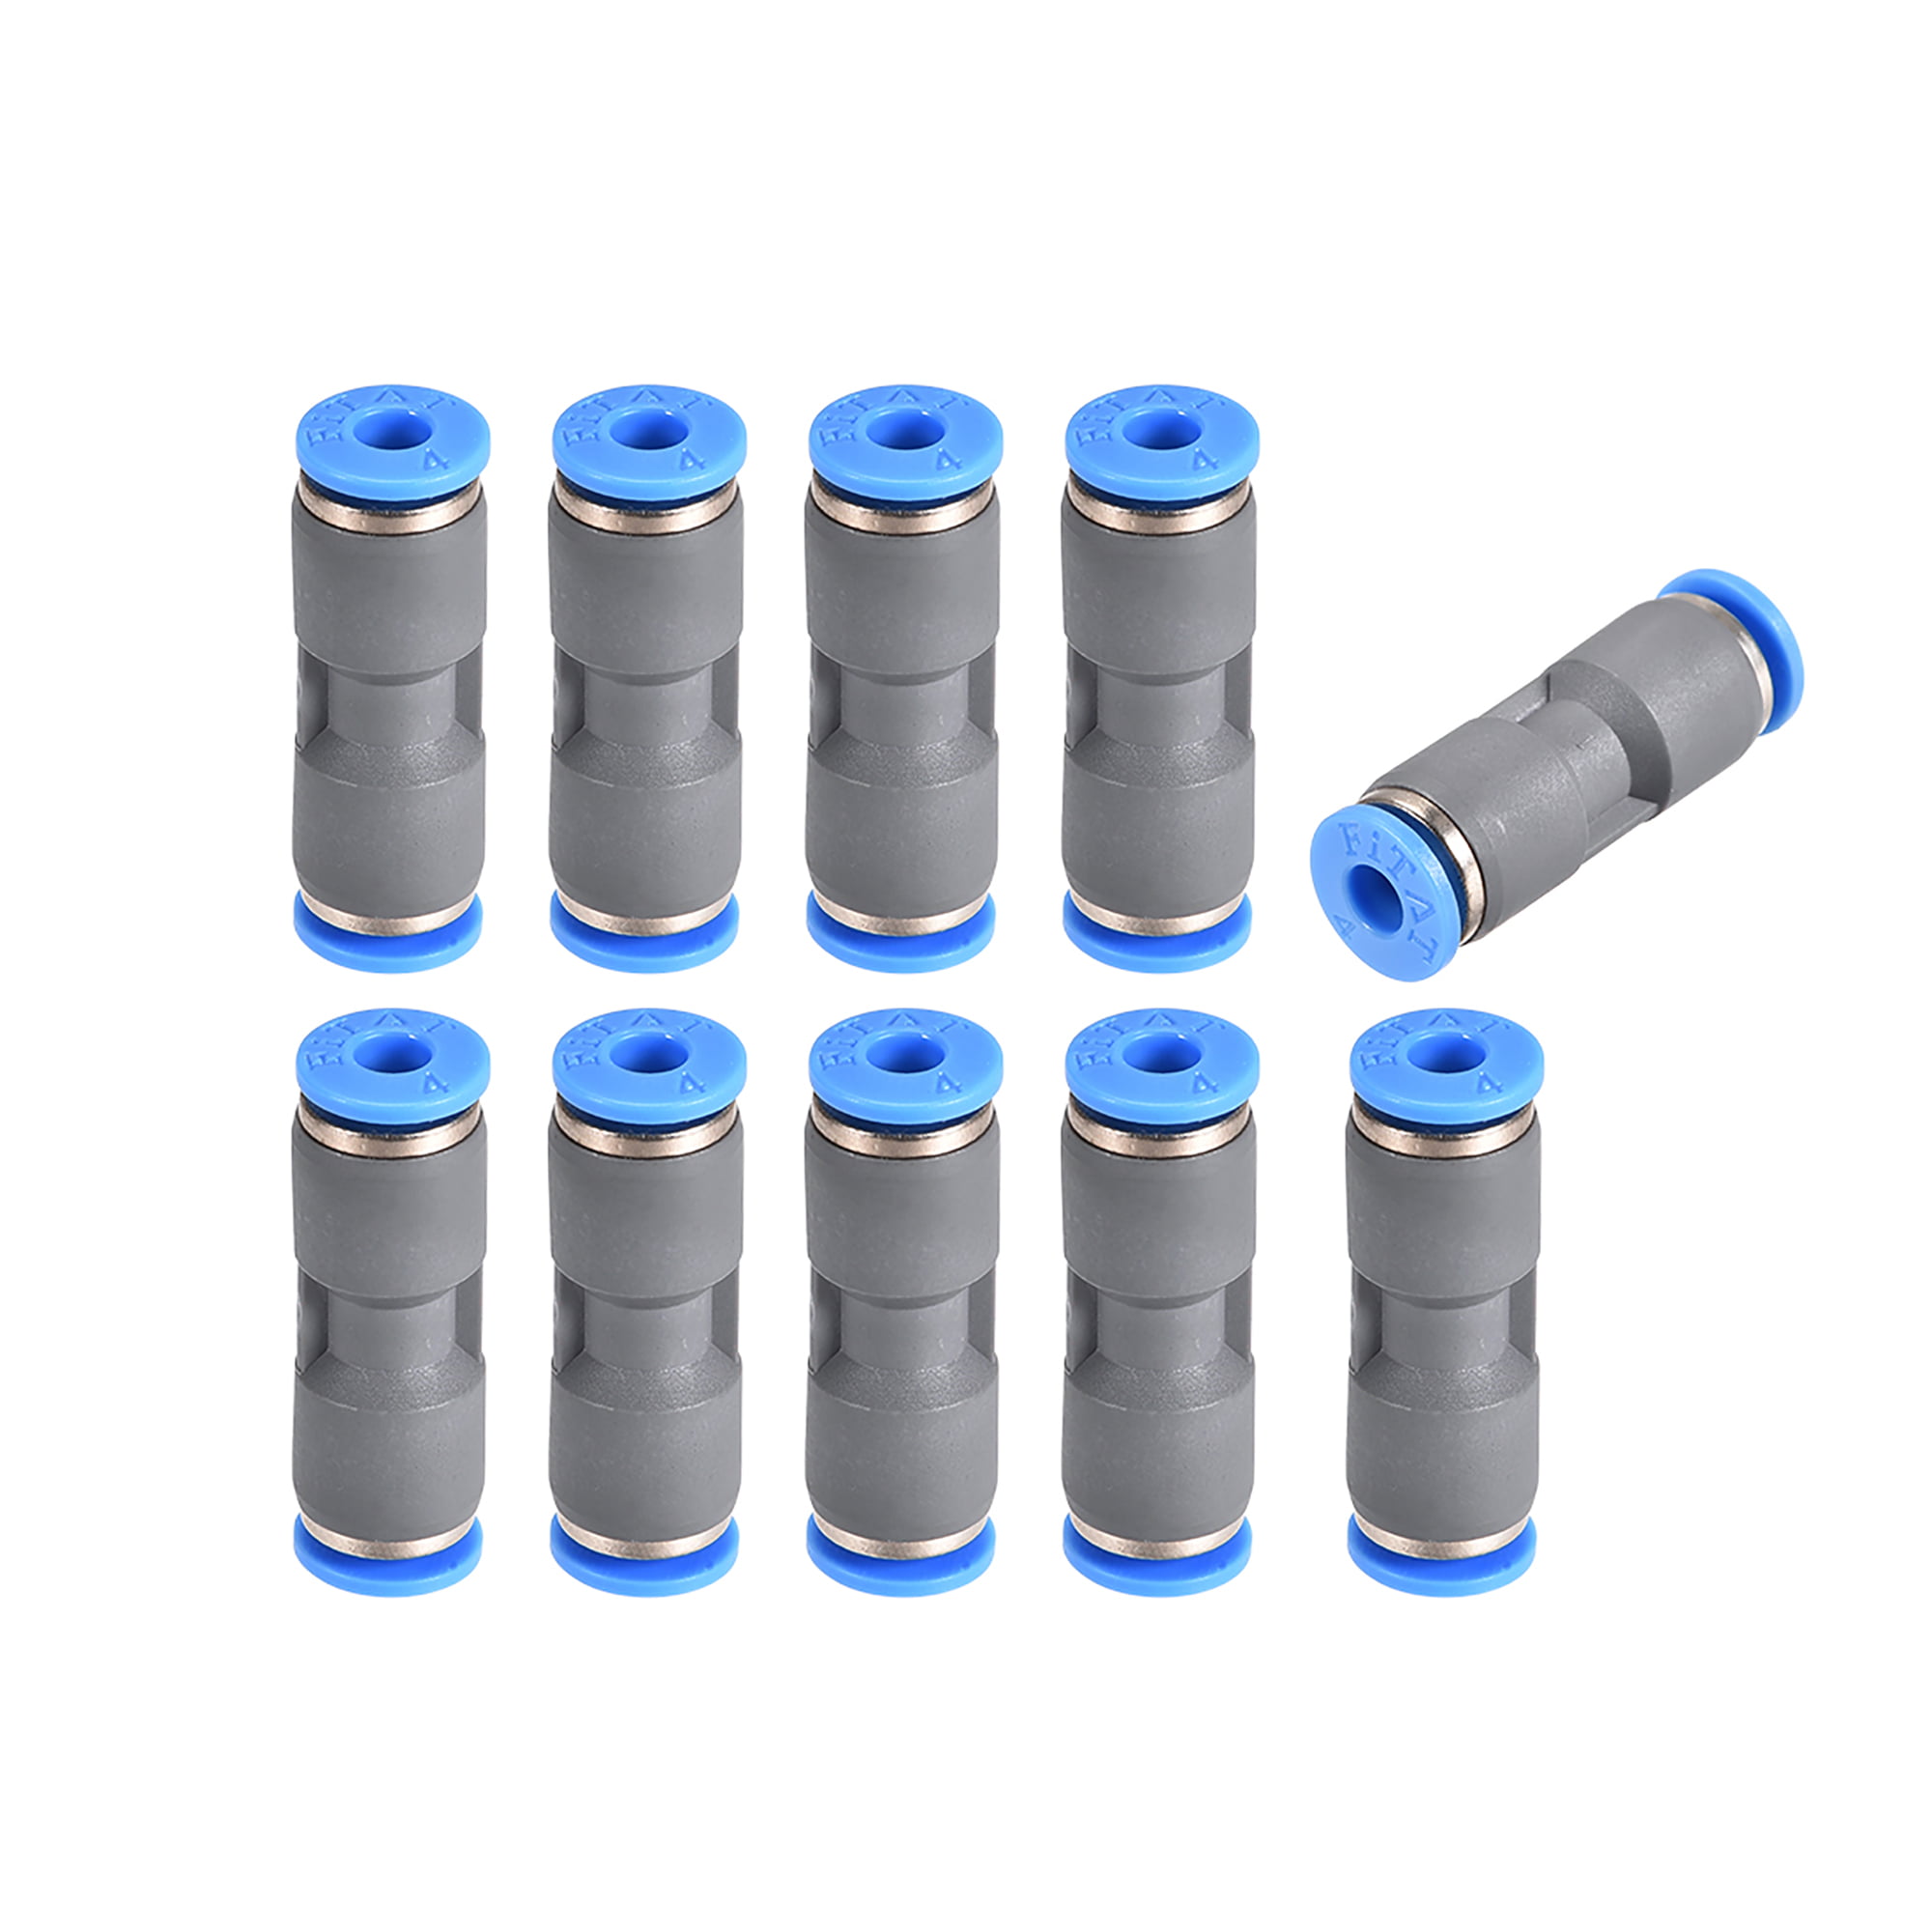 Straight Push Connectors 4mm Quick Release Pneumatic Connector Plastic Quick Release Button Connectors Telescoping Tubing